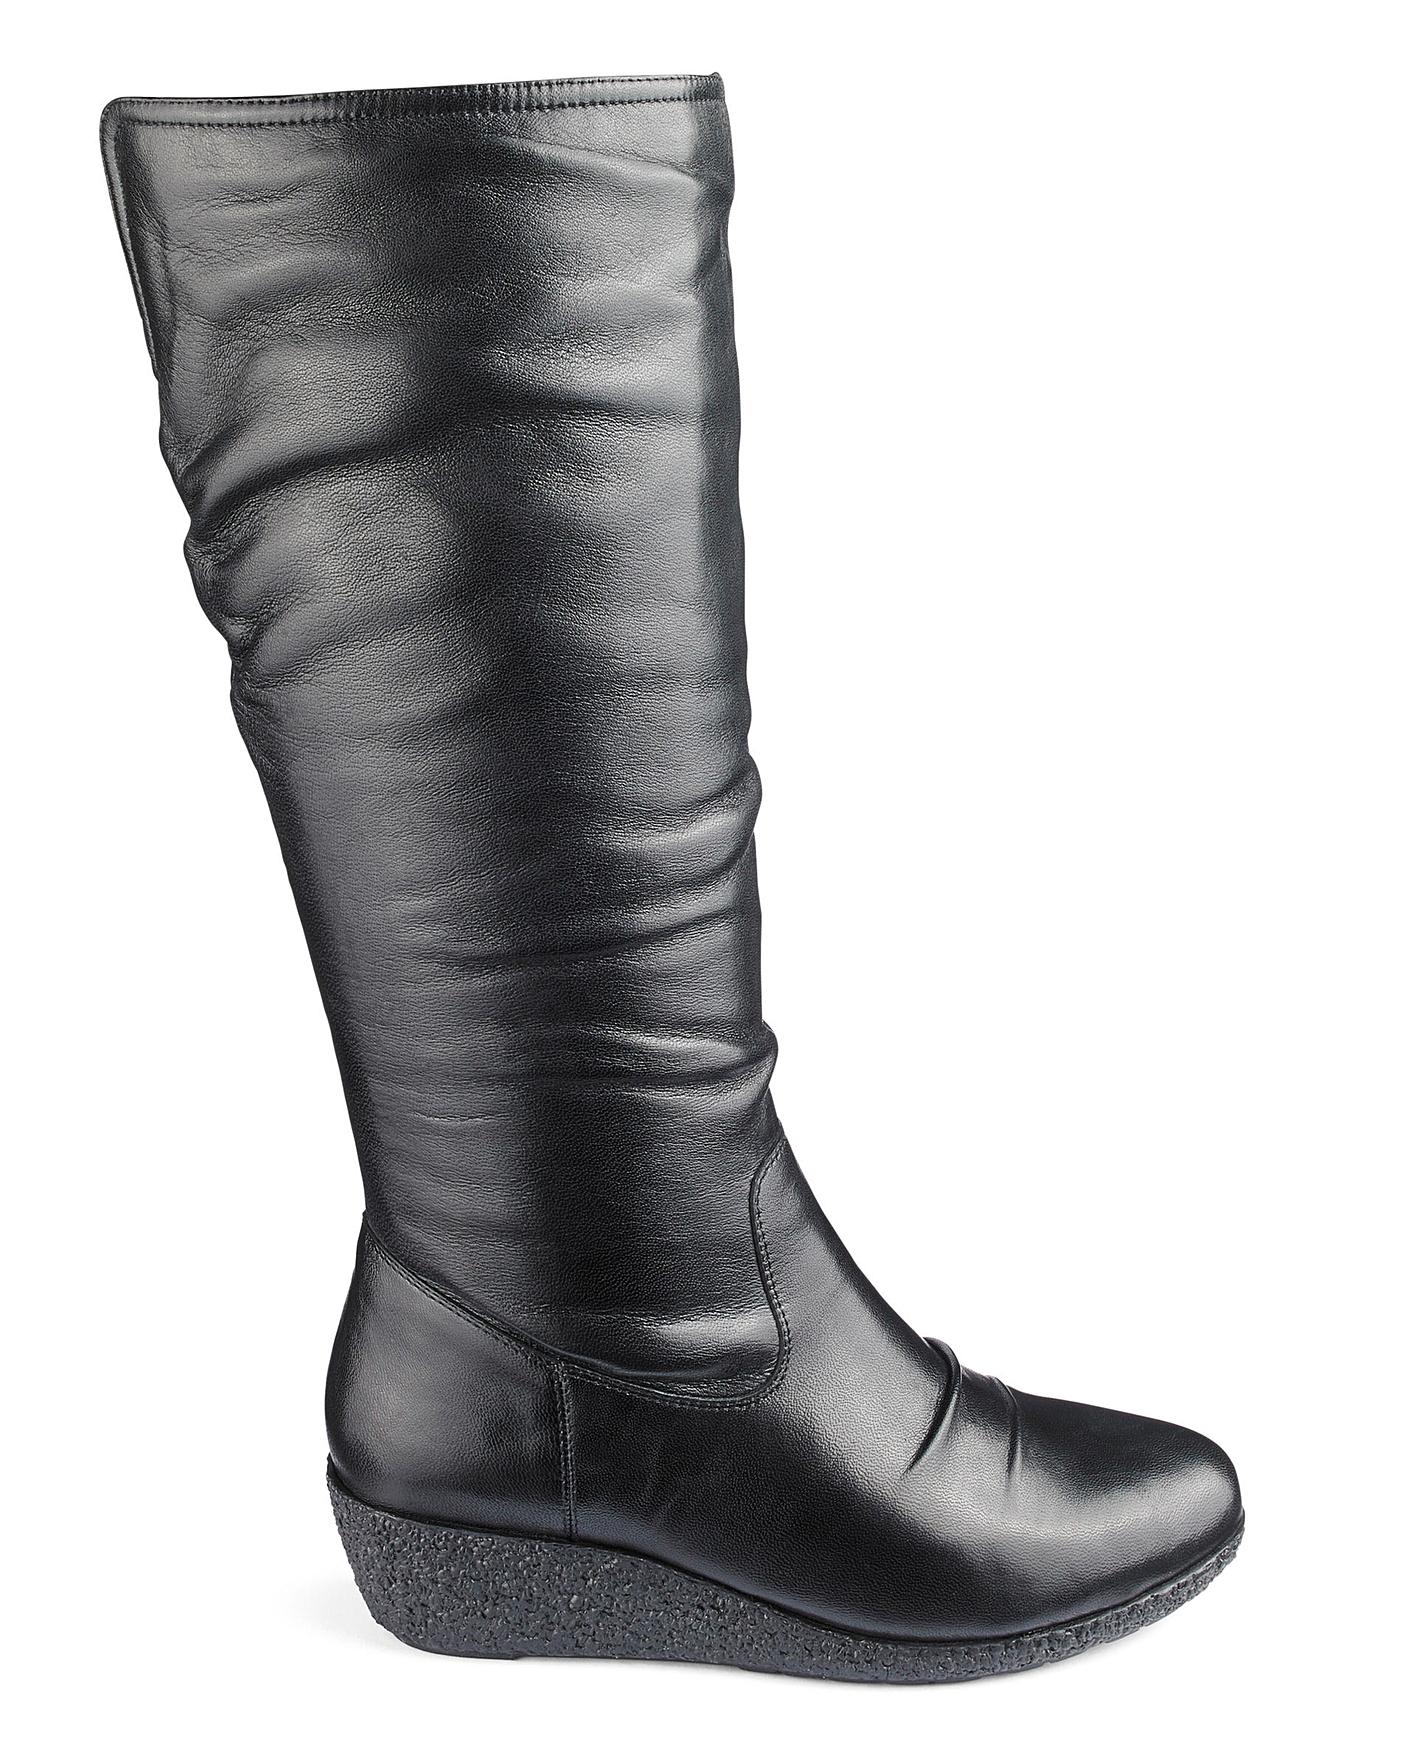 Leather Wedge Boots E Fit Super Curvy | Crazy Clearance